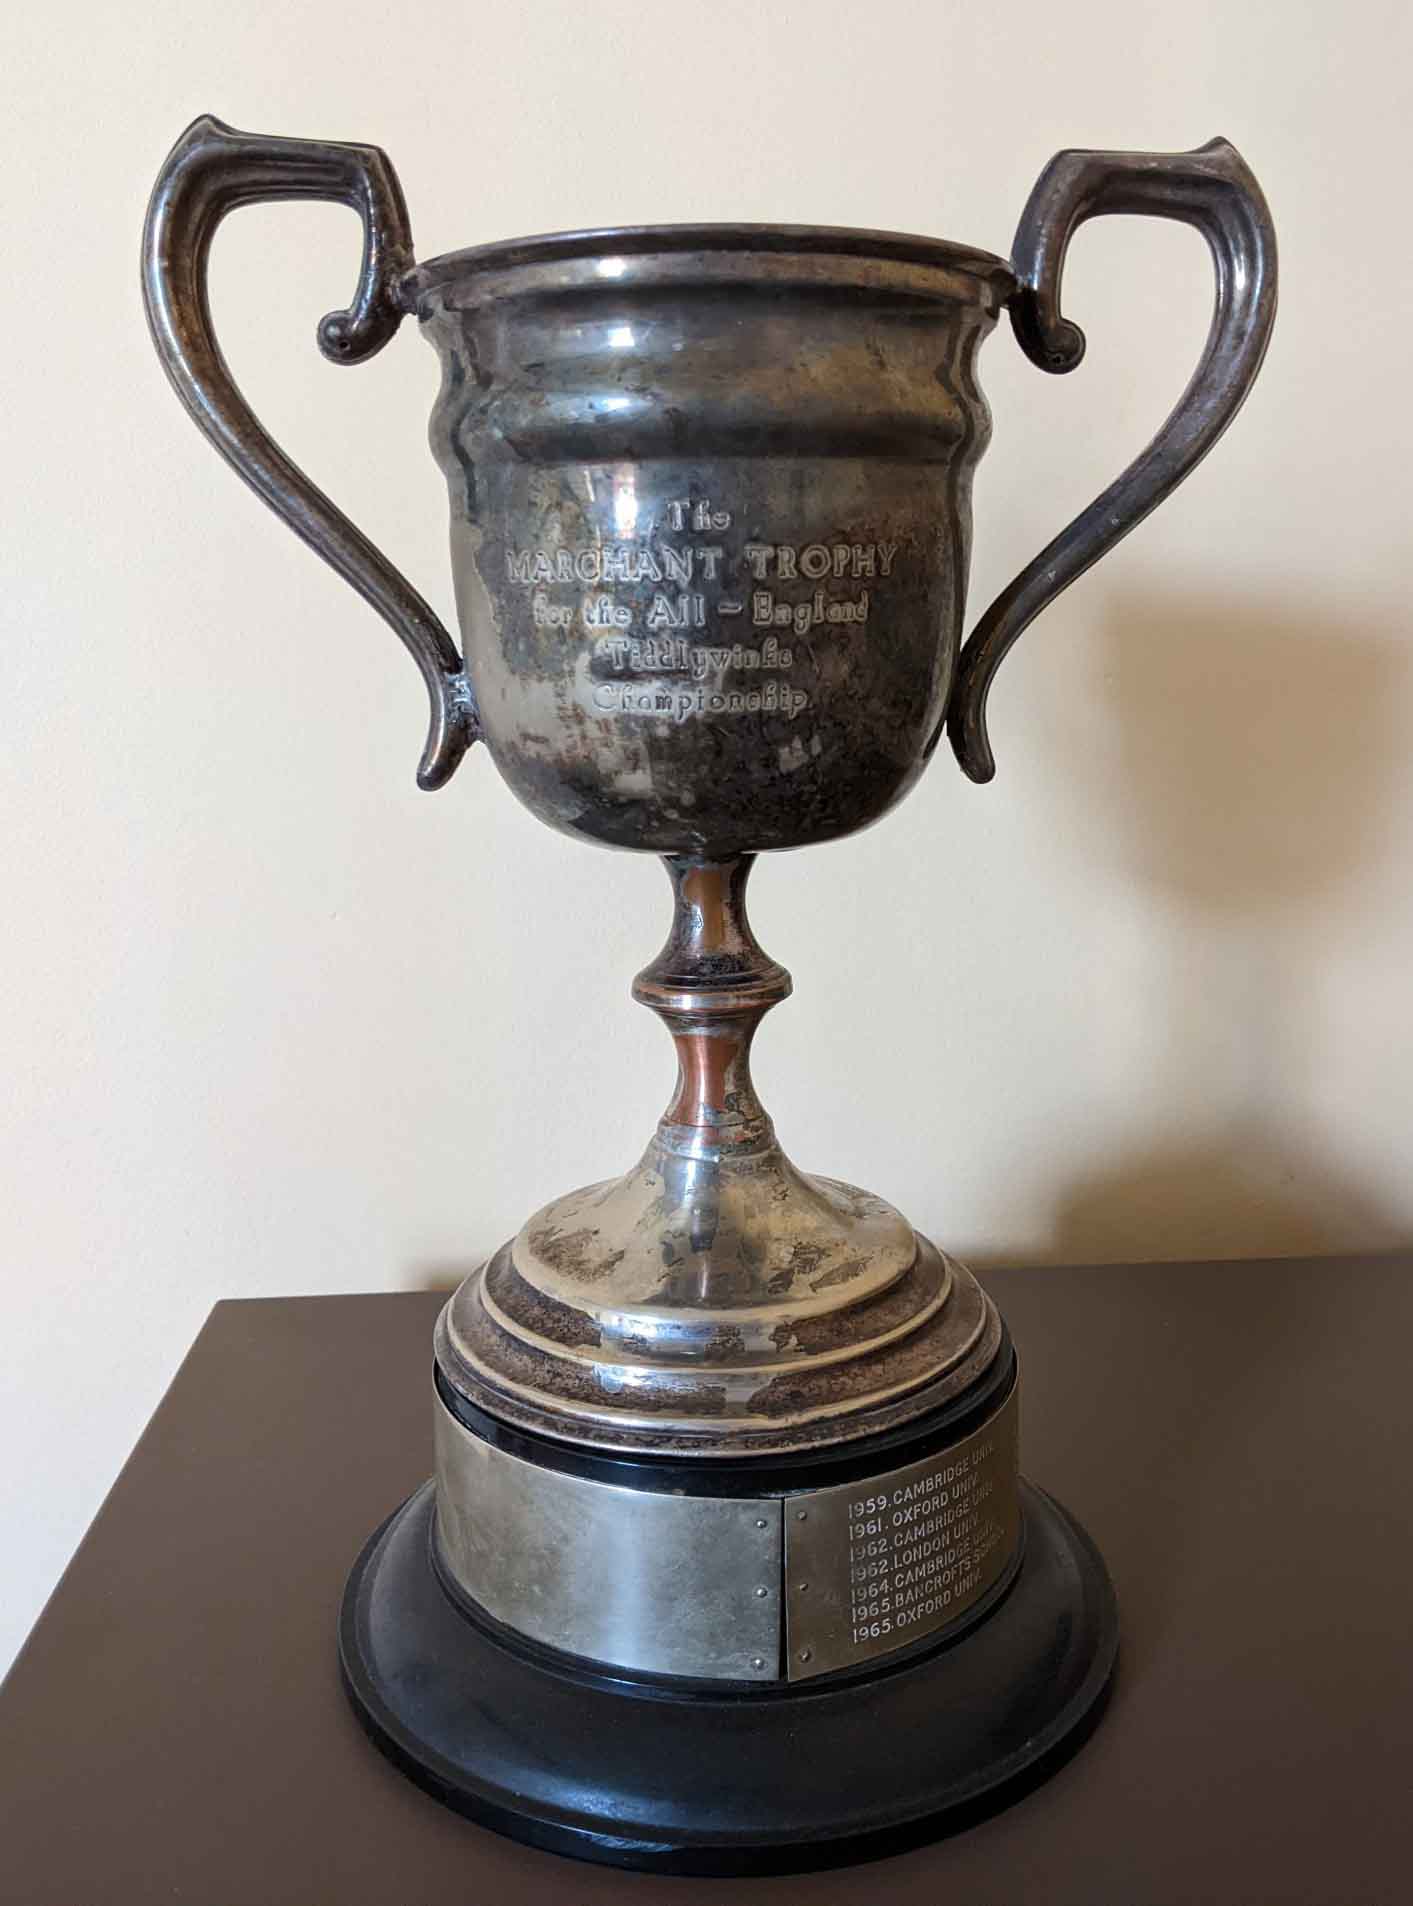 The Marchant Trophy